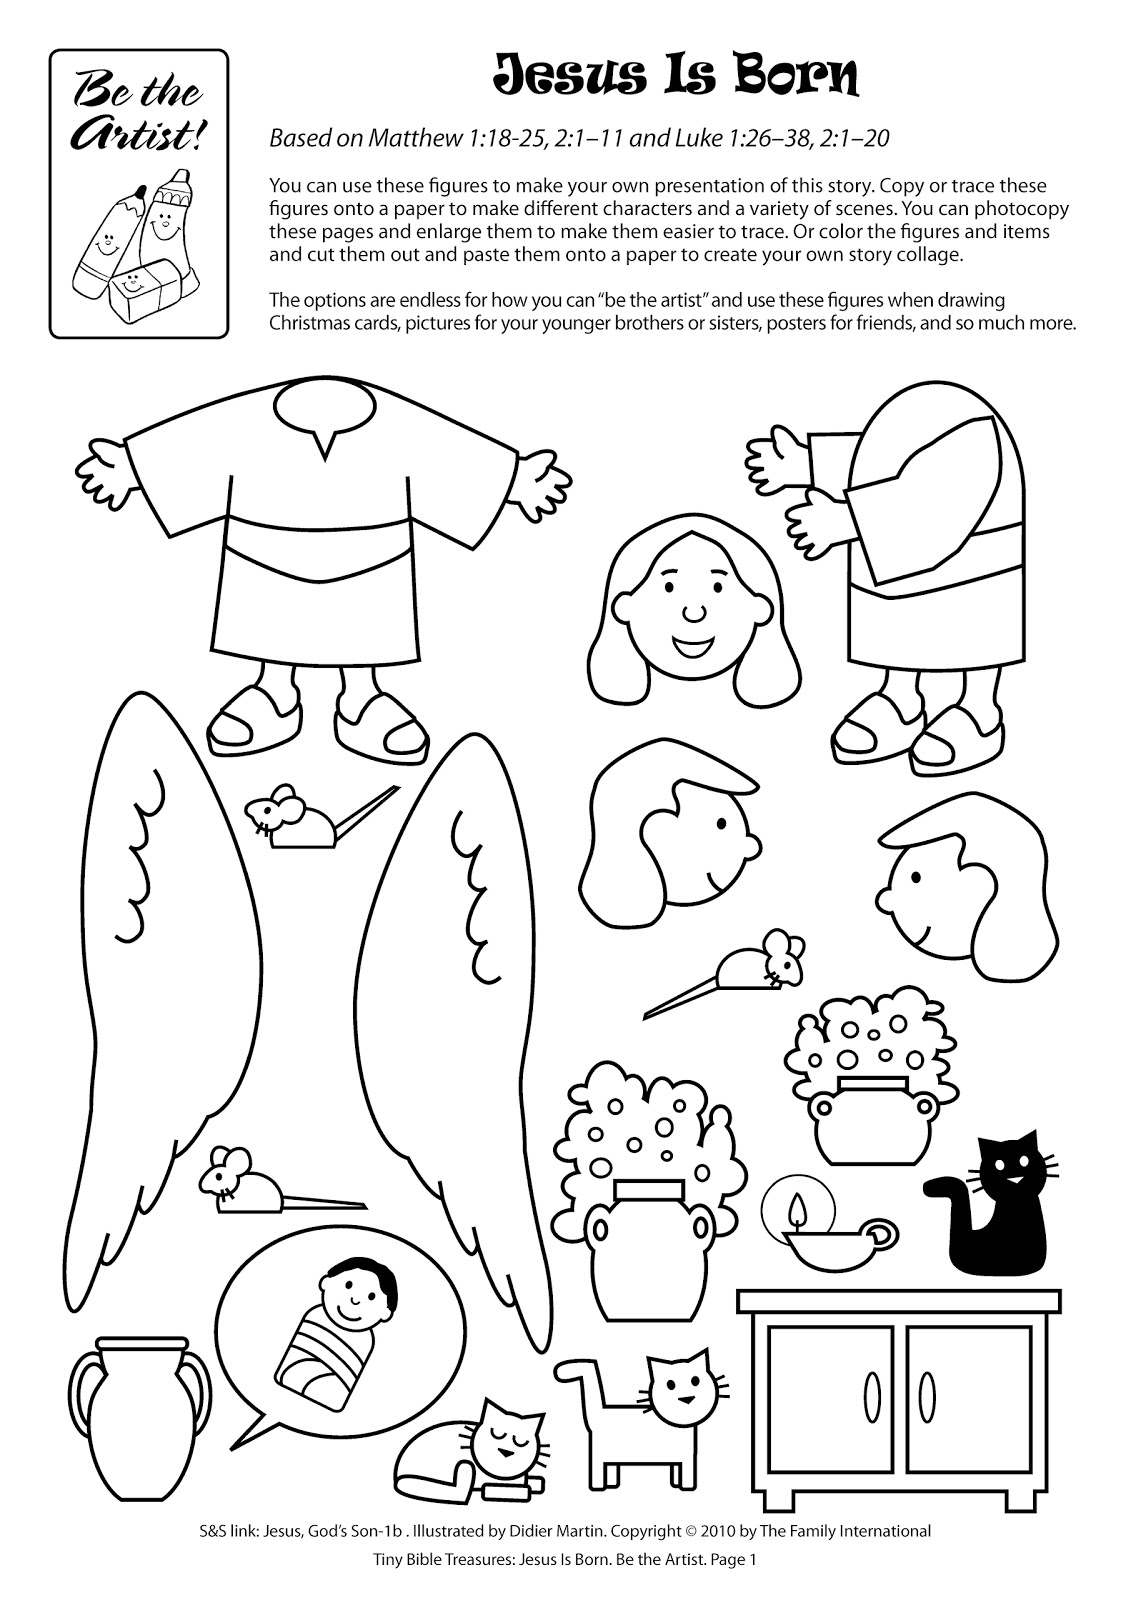 Download Jesus Is Born Page Coloring Pages